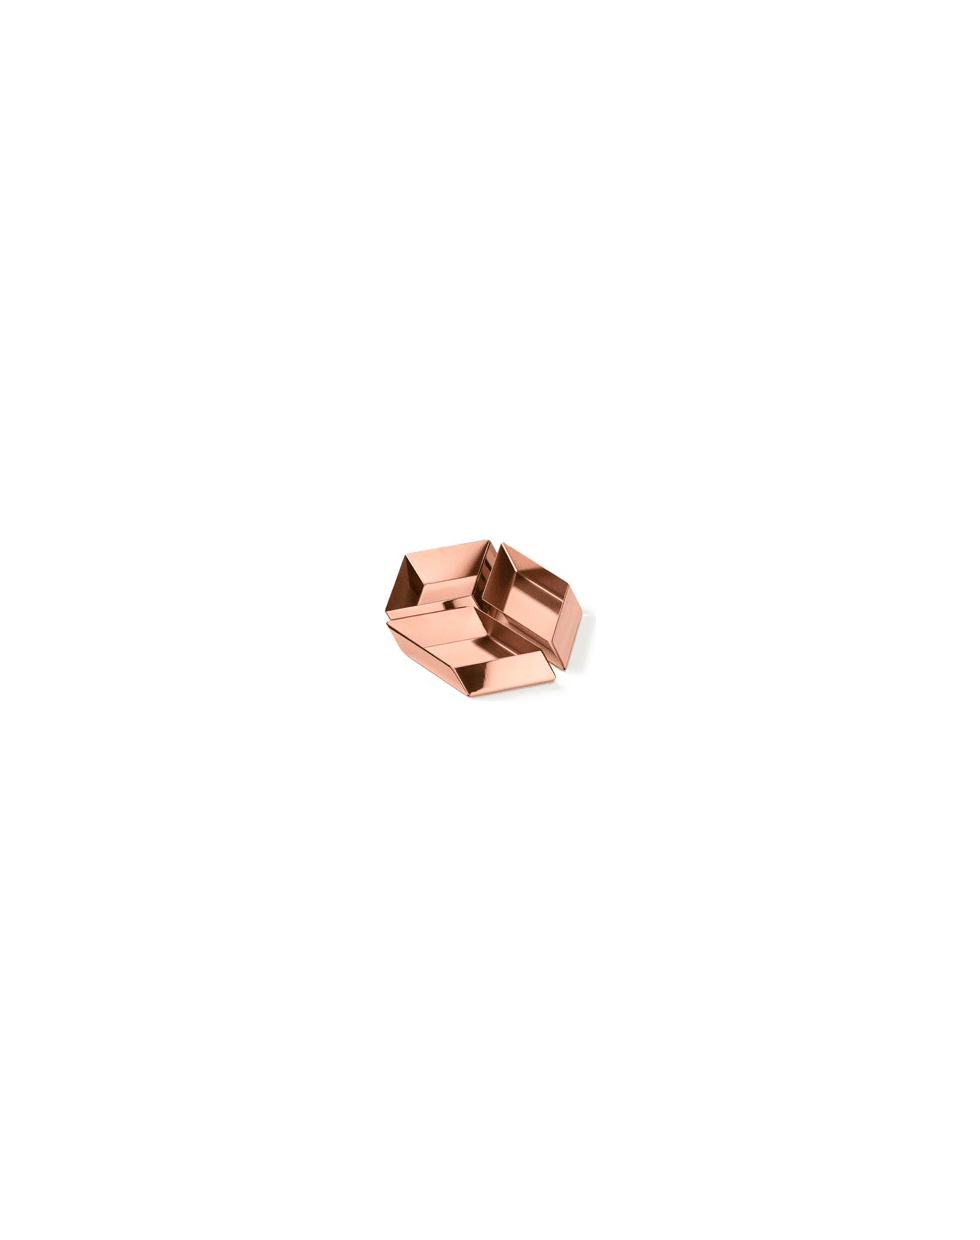 Ghidini 1961 Axonometry - Small Cube Rose Gold - Rose gold